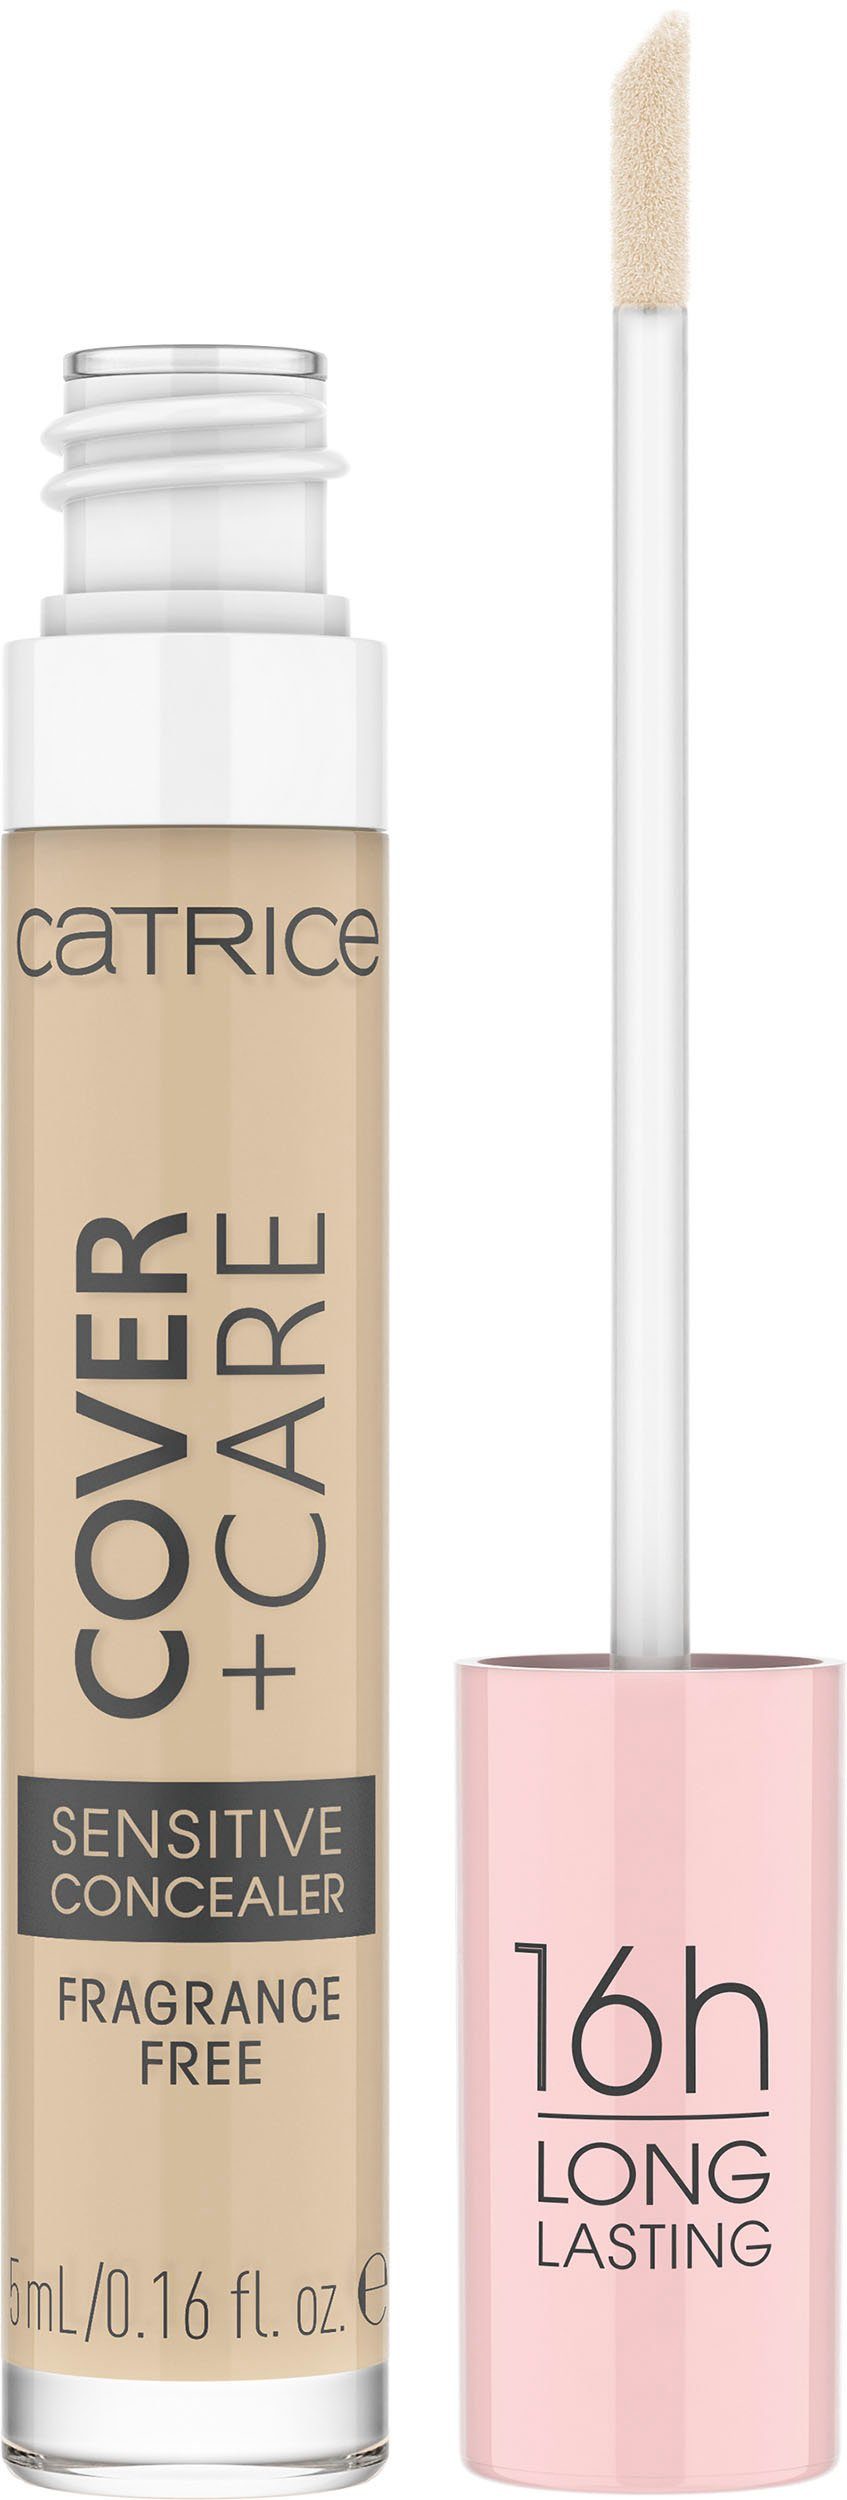 Catrice 002N 3-tlg. nude Concealer Concealer, Sensitive Care Cover Catrice +